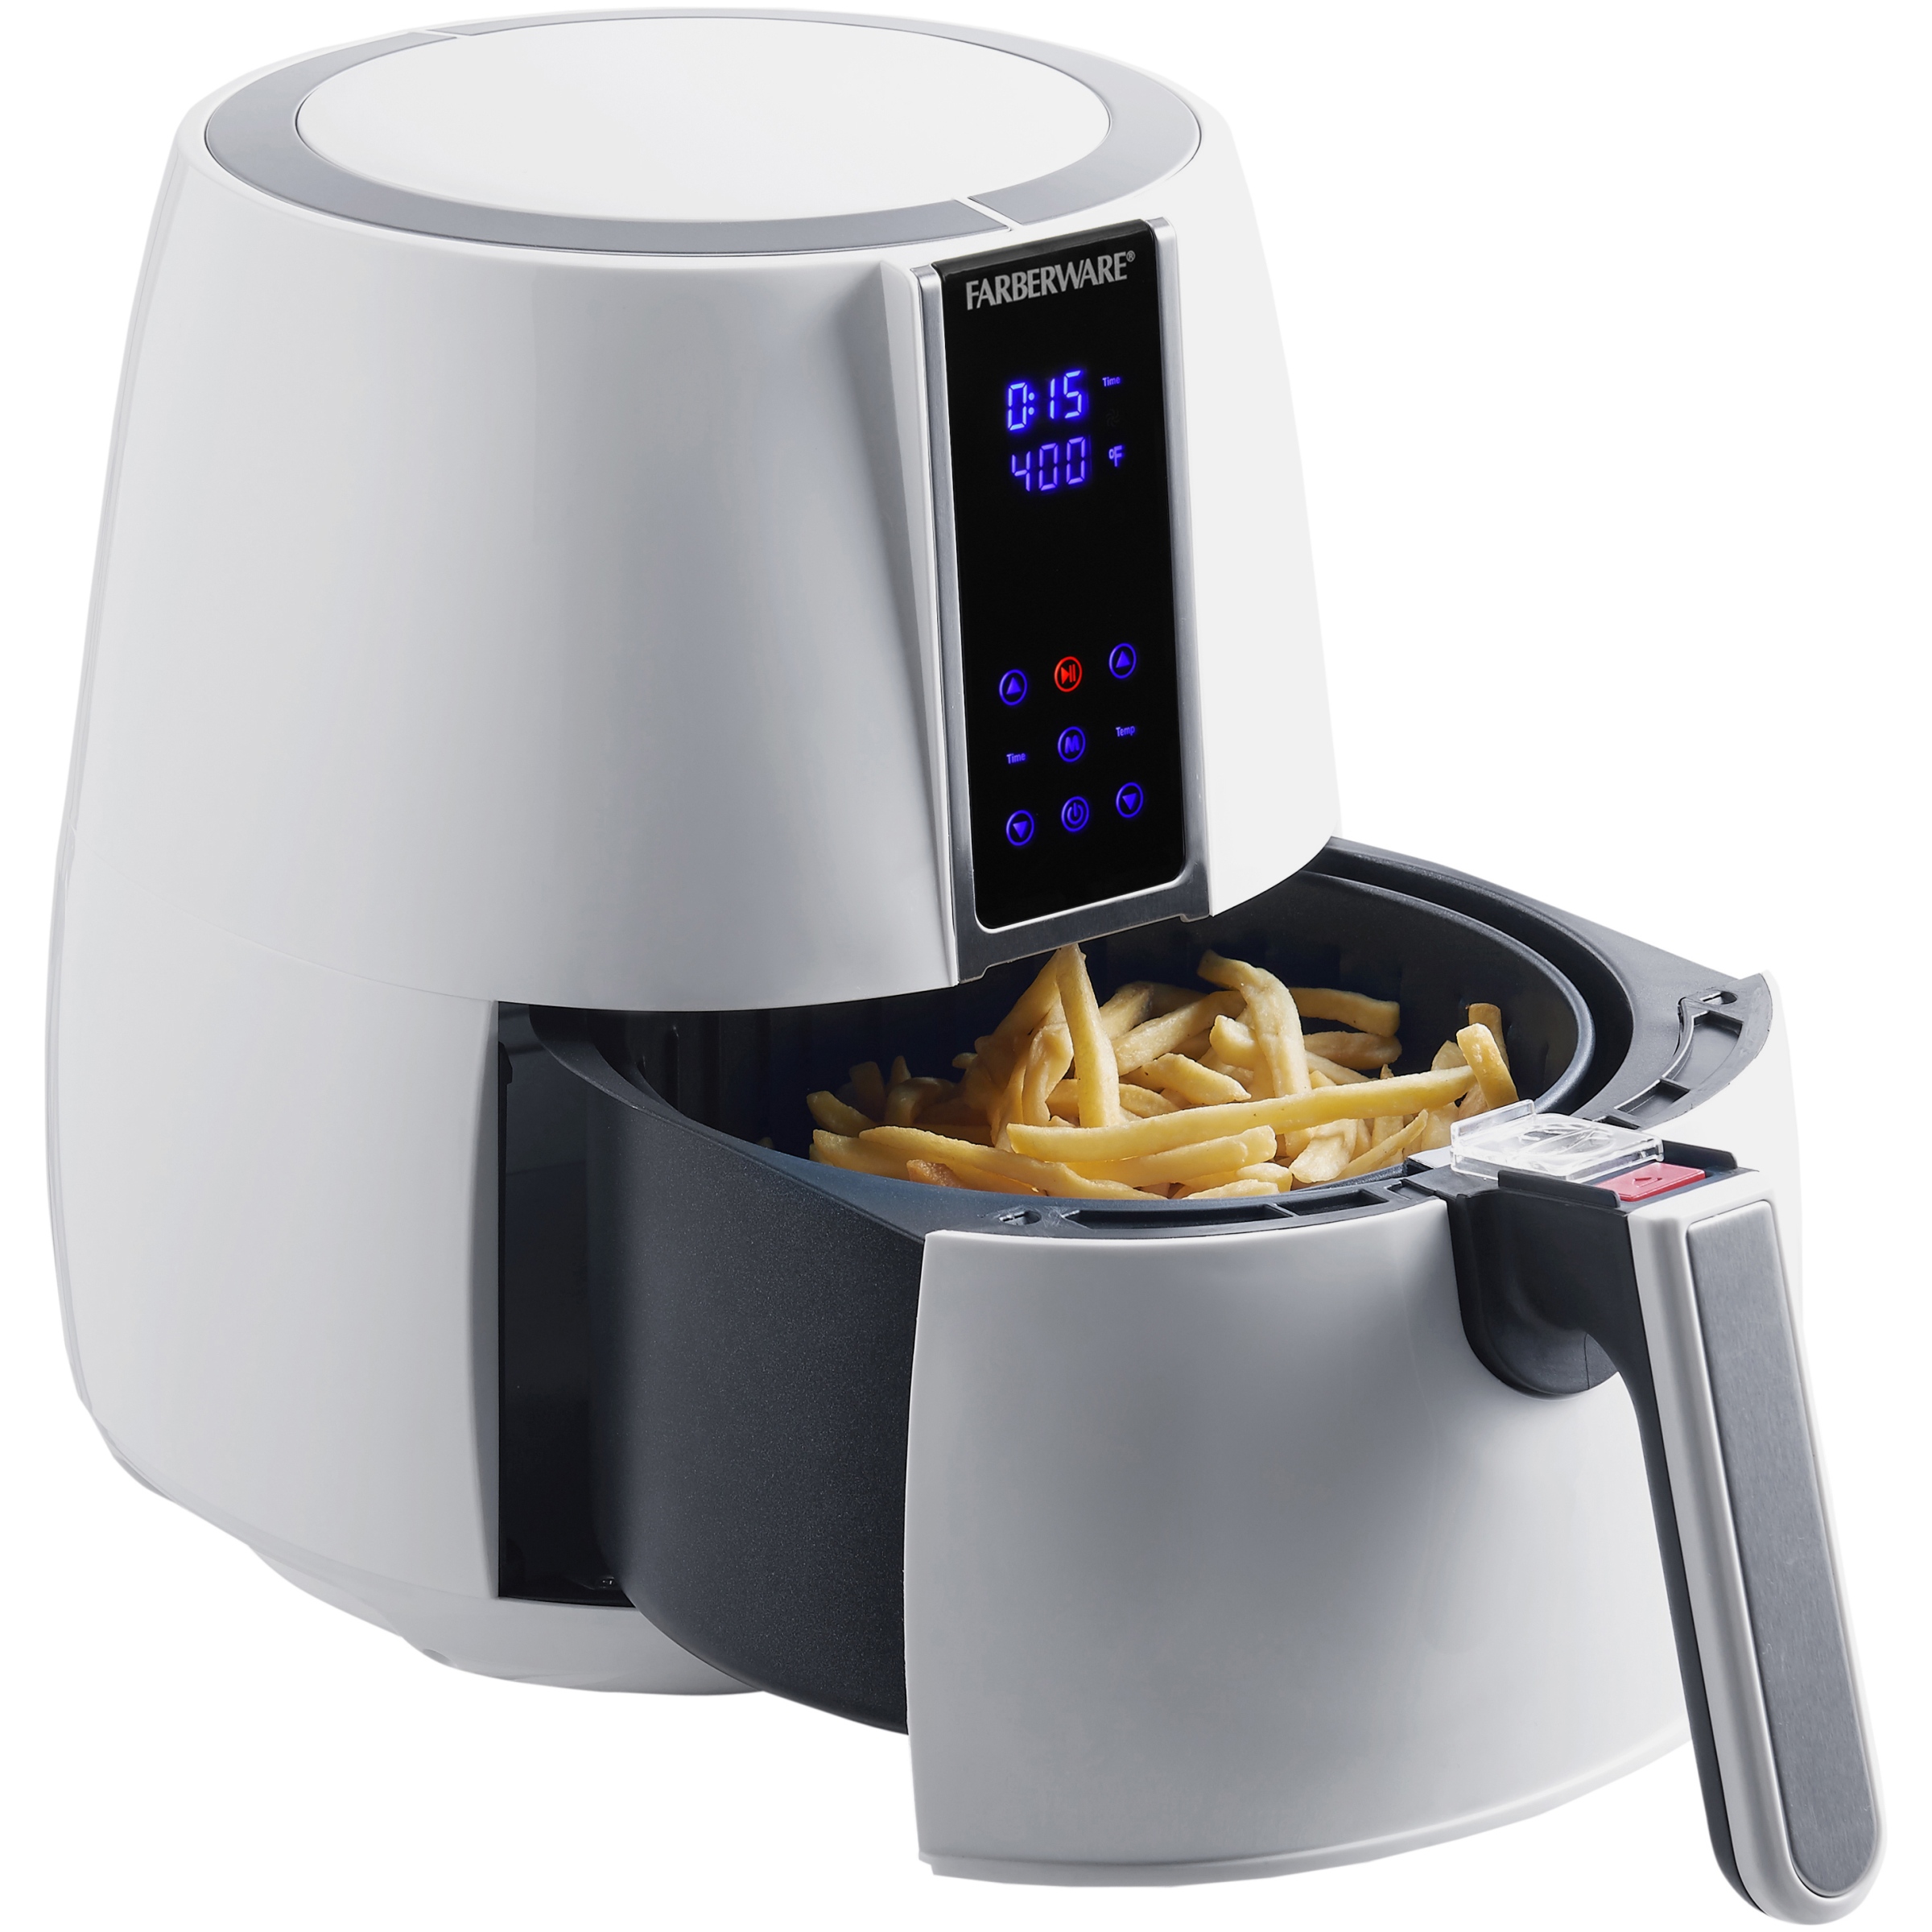 Farberware 3.2 Quart Digital Oil-Less Fryer, The 50 Best and Enticing Gifts for Grandparents in 2022